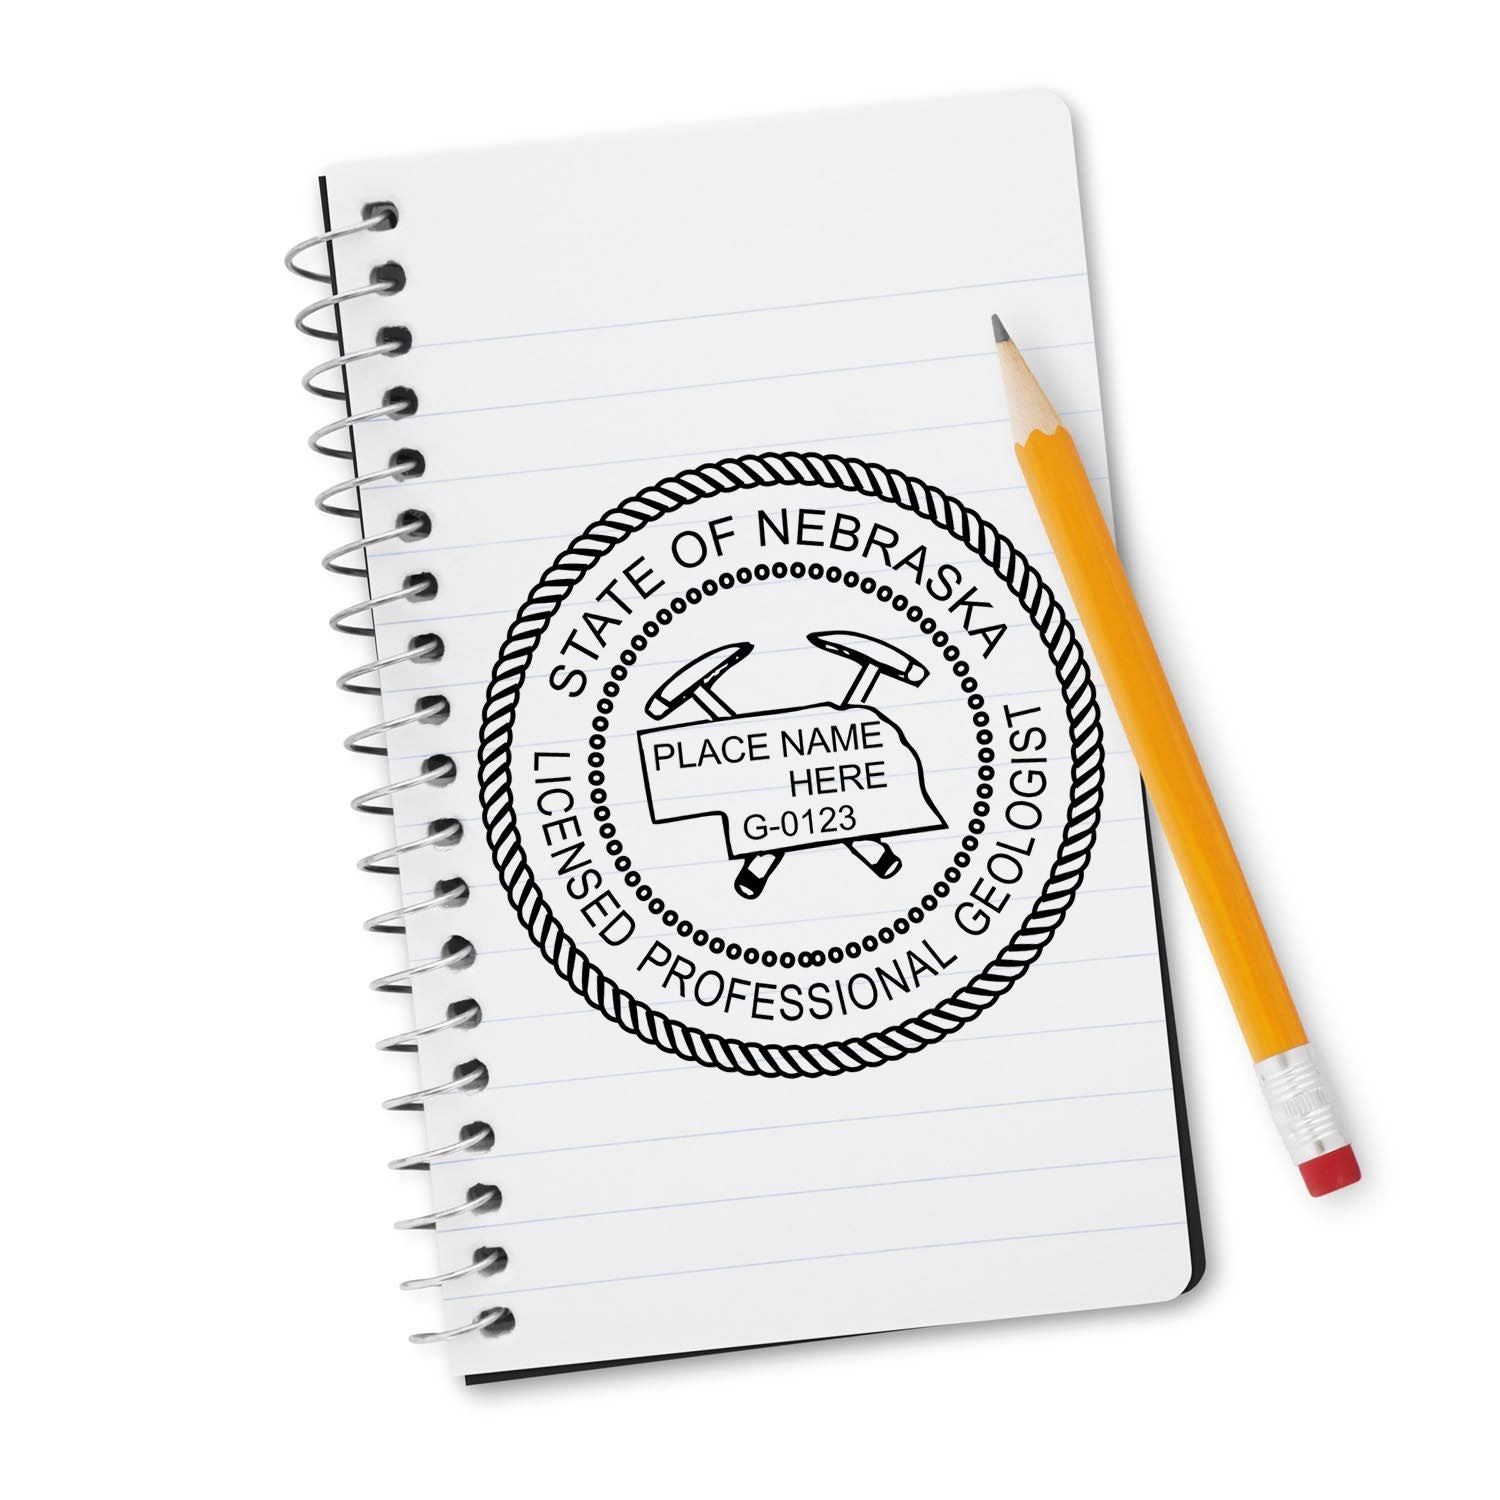 The main image for the Slim Pre-Inked Nebraska Professional Geologist Seal Stamp depicting a sample of the imprint and imprint sample